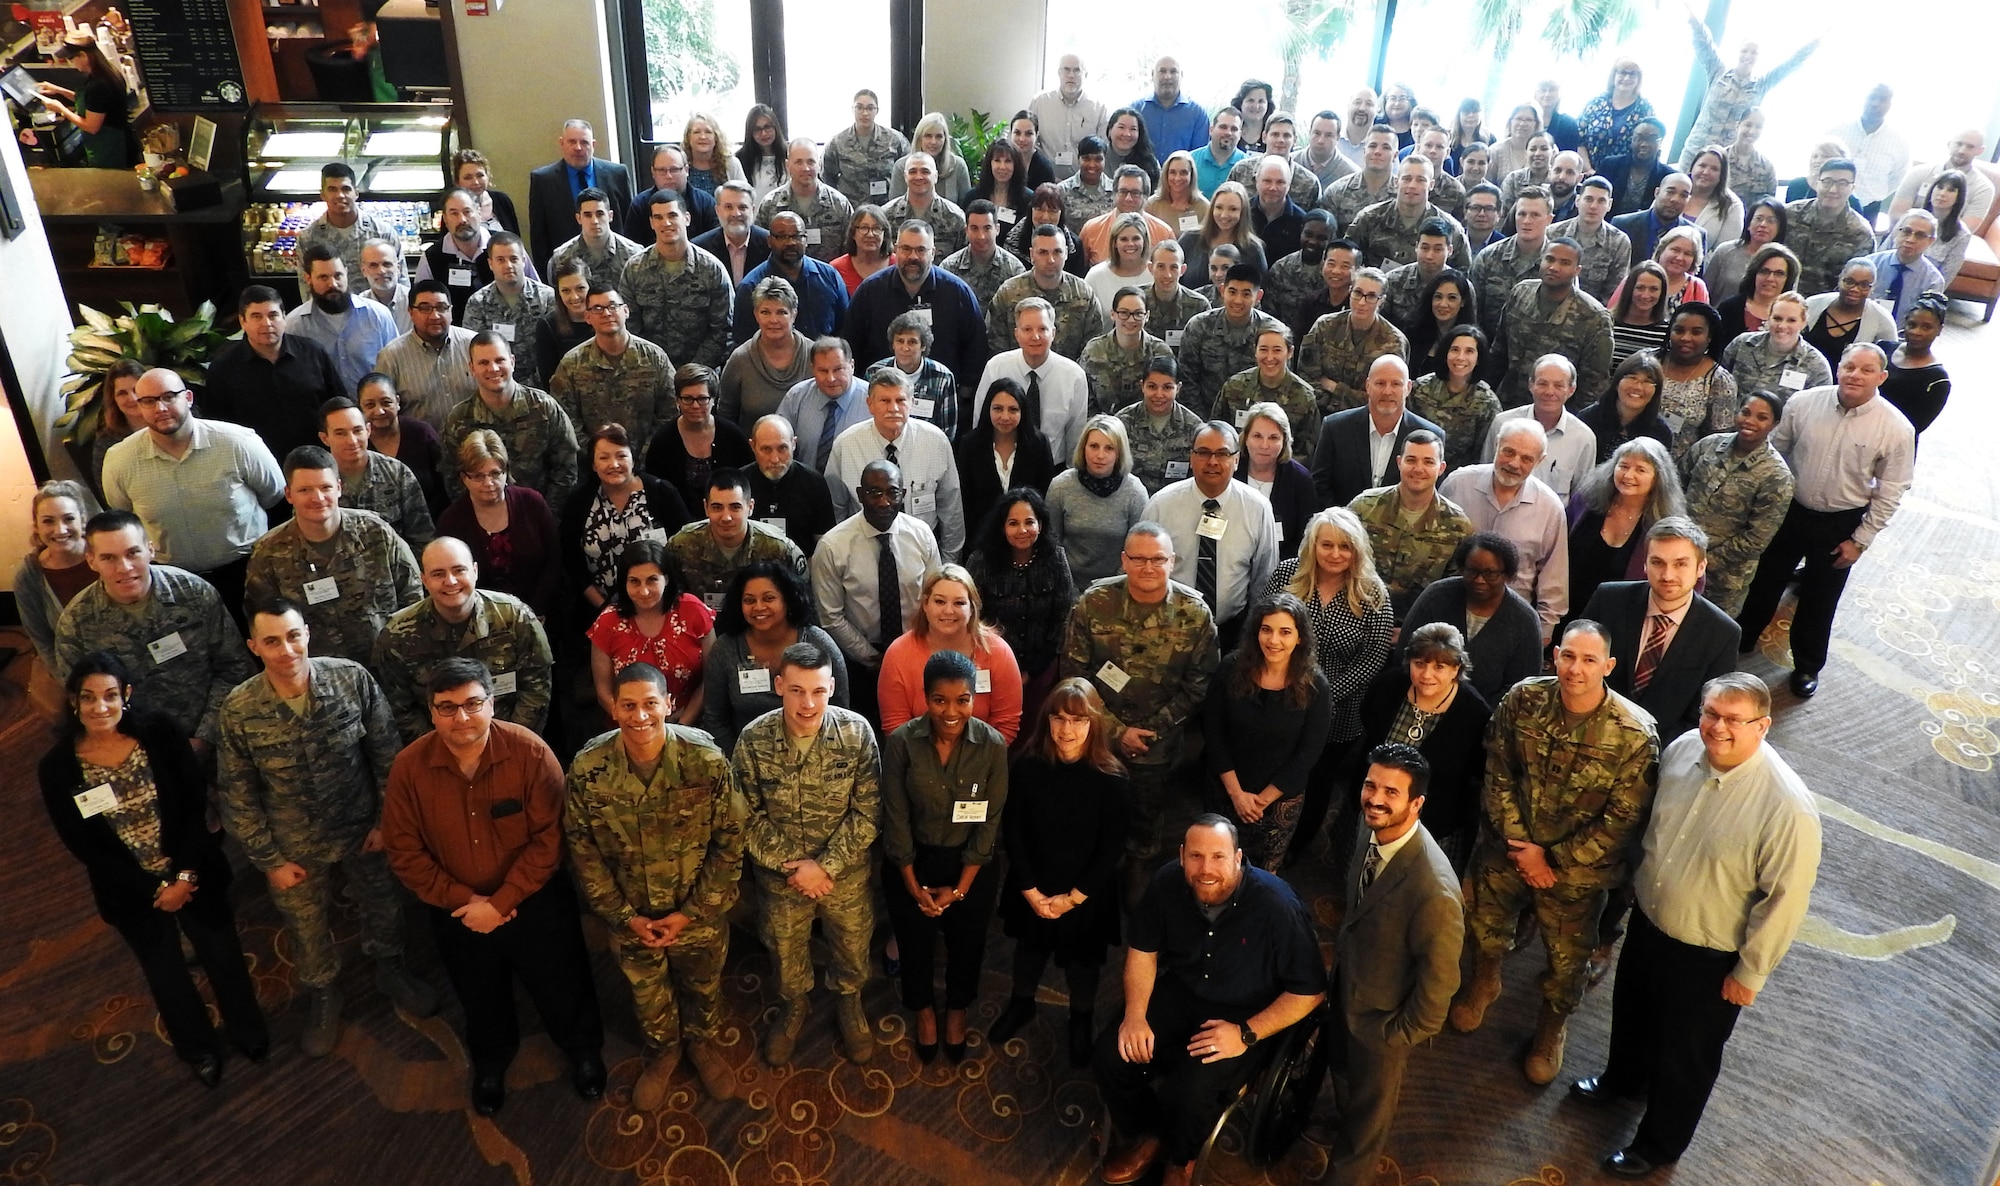 More than 160 Air Force budget officers and analysts collaborated and networked in San Antonio, Feb. 26-28. (U.S. Air Force photo by Ed Shannon)